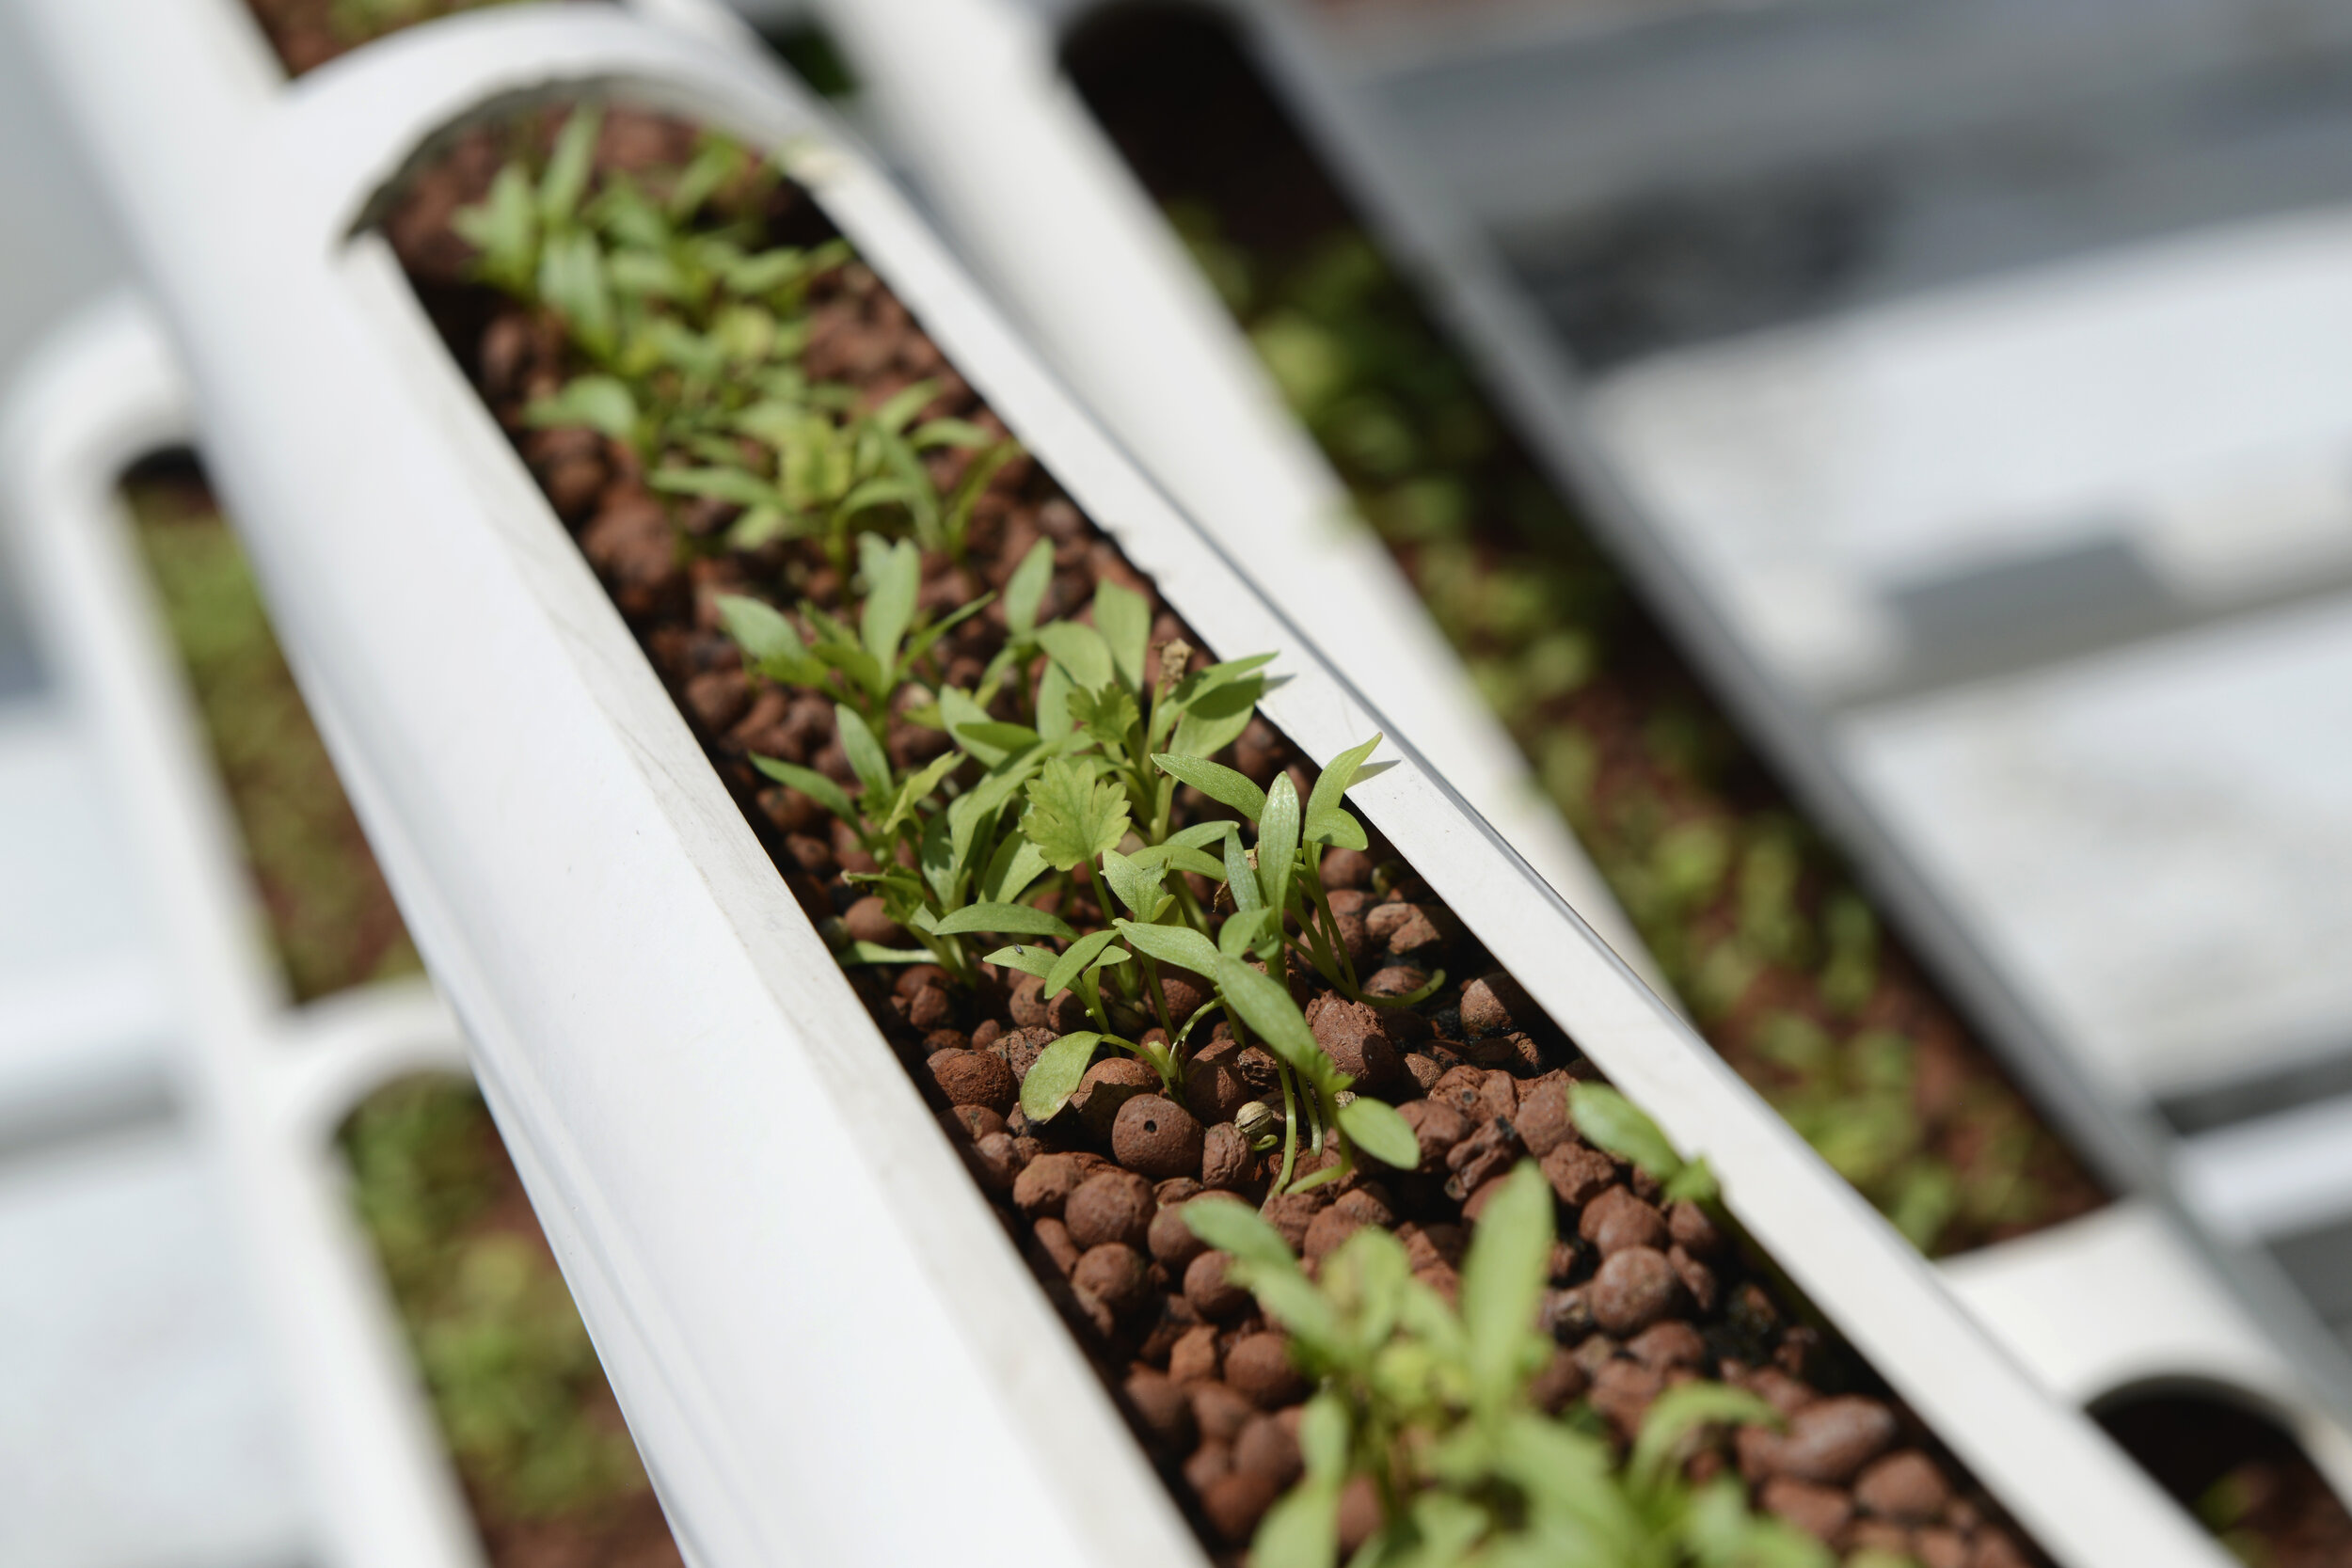  Organic cilantro seedlings sprout from growing towers that are primarily made out of polyvinyl chloride (PVC) pipes at Citiponics' urban farm on the rooftop of a multi-storey carpark in a public housing estate in western Singapore 